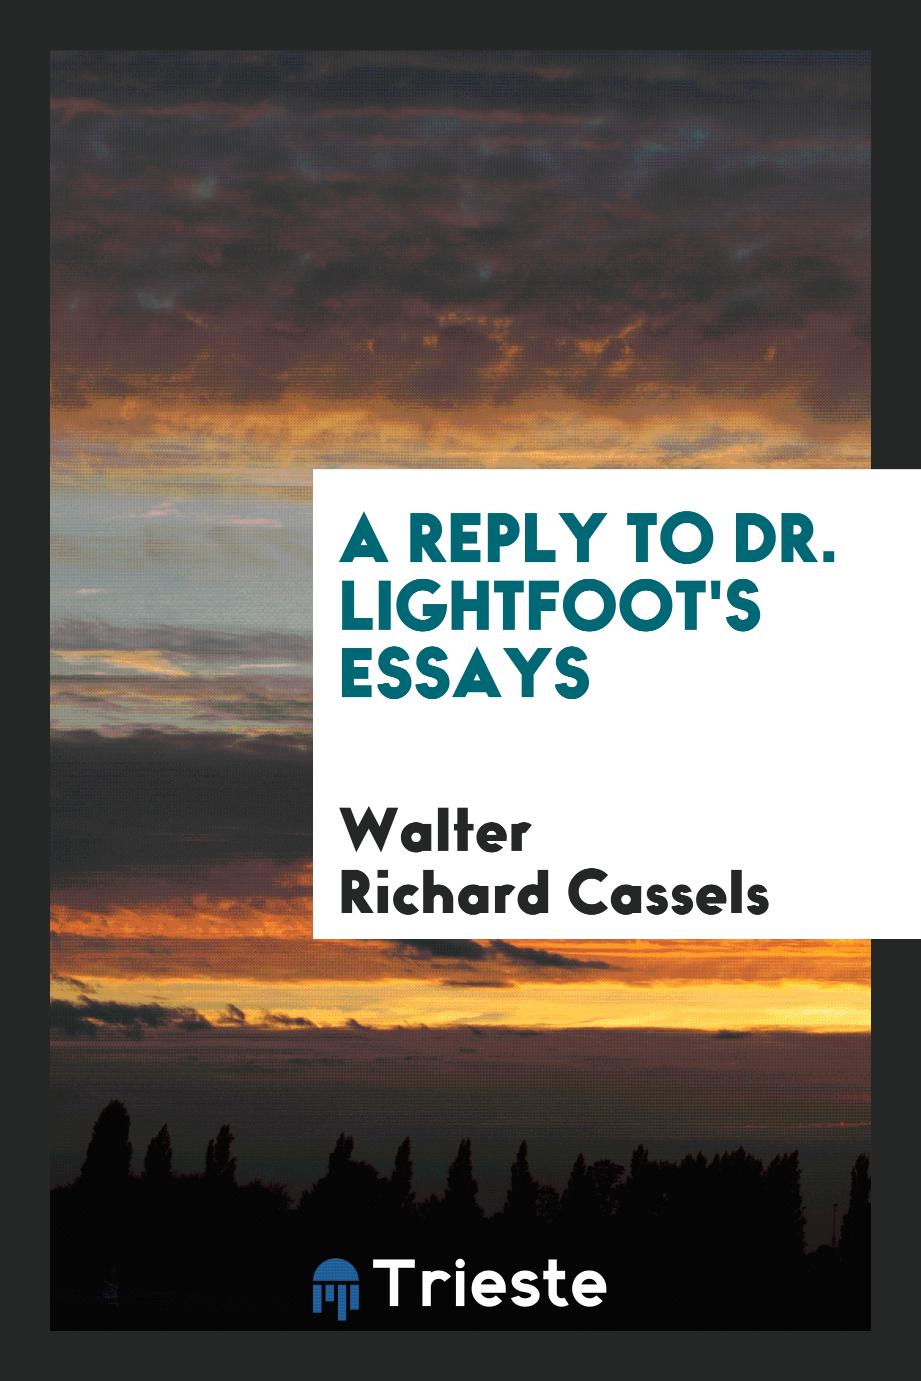 A Reply to Dr. Lightfoot's essays